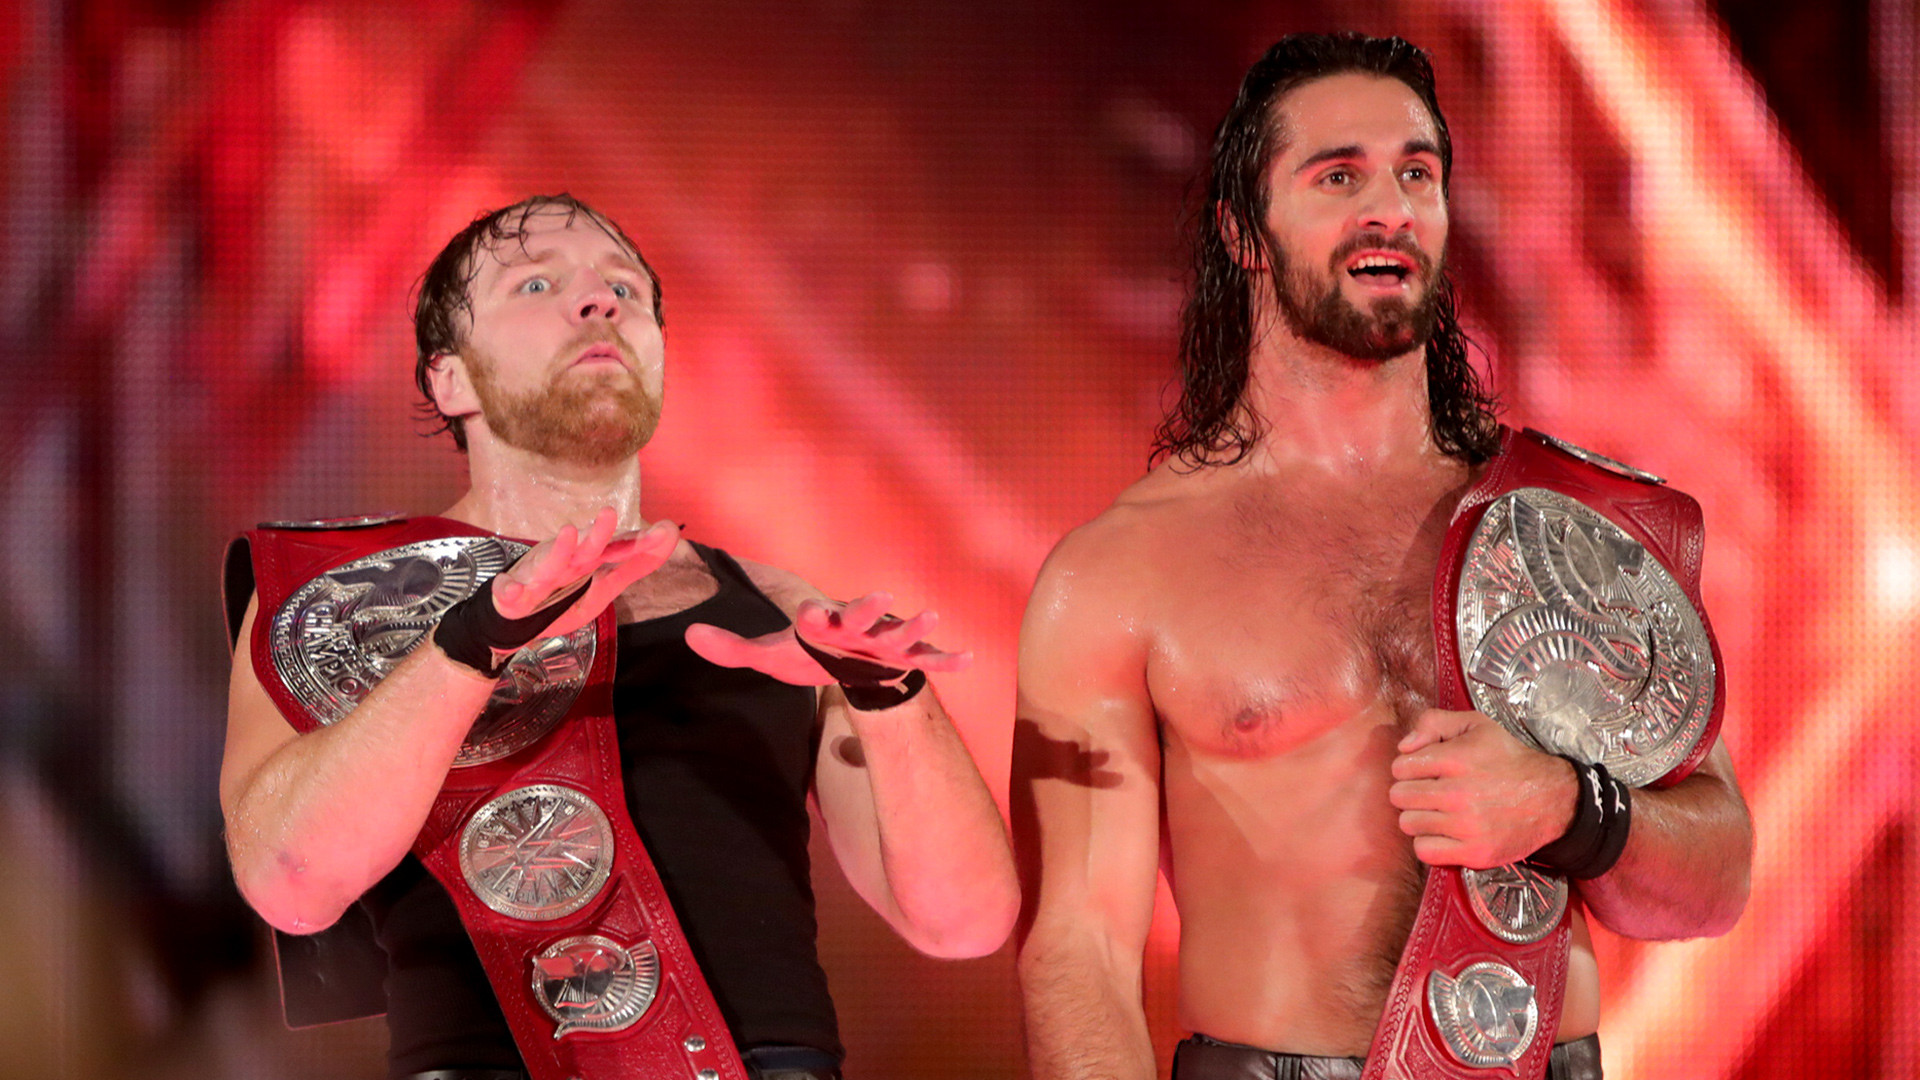 1920x1080 While Sheamus & Cesaro prepared to take on Heath Slater and Rhyno, Seth  Rollins & Dean Ambrose happily took a spot at the commentary table ...